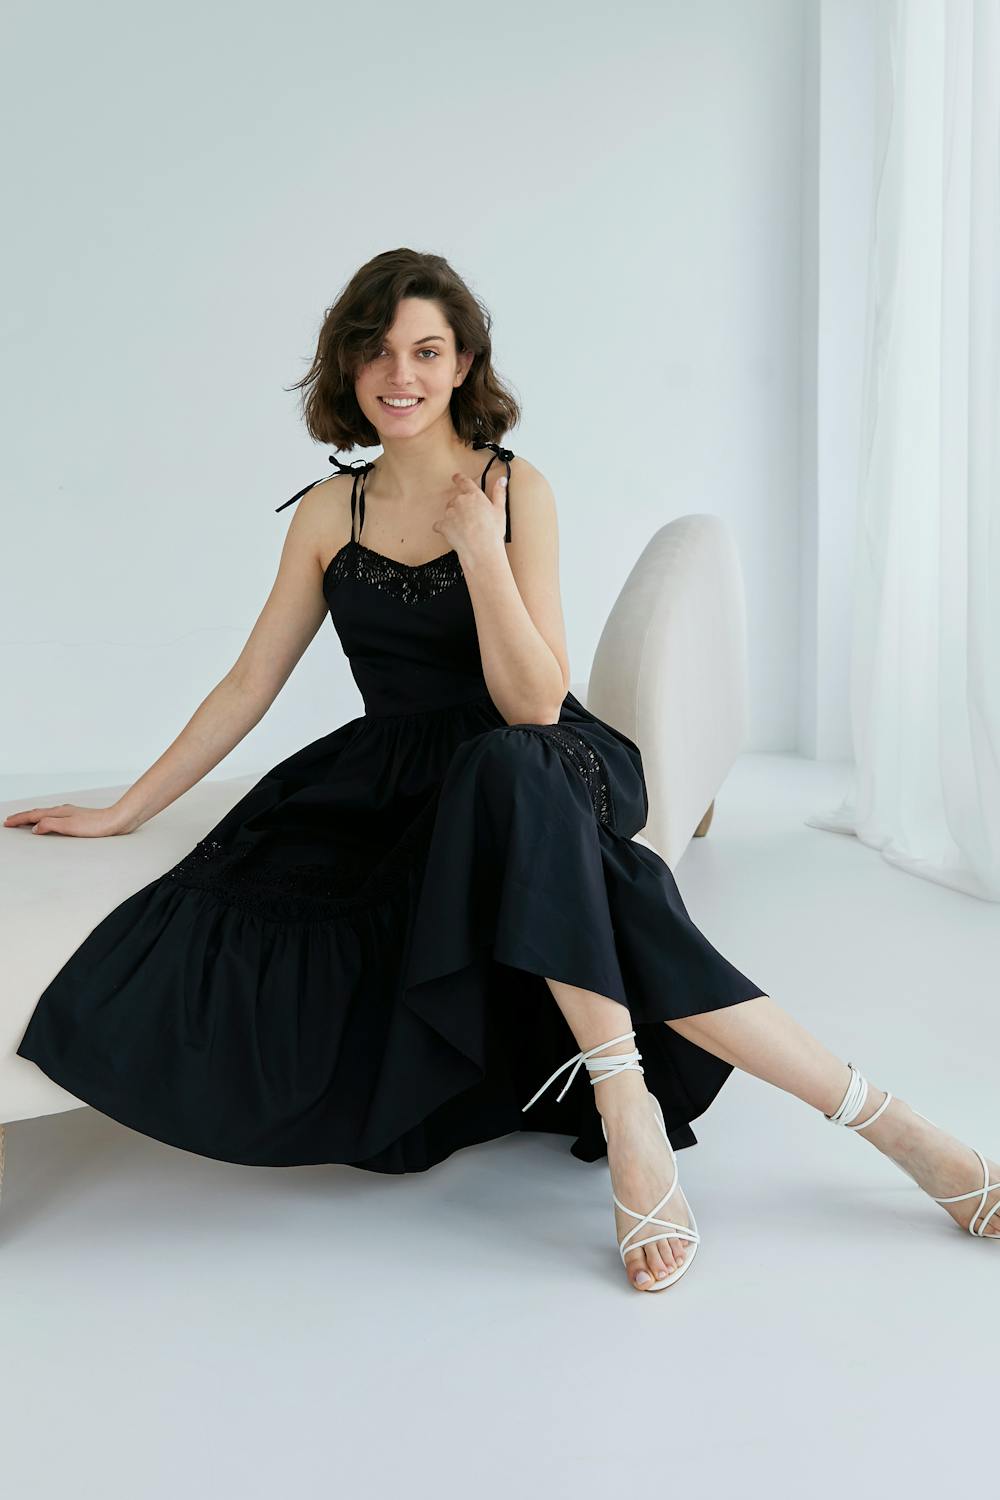 Can you wear black to weddings? Maxi dresses